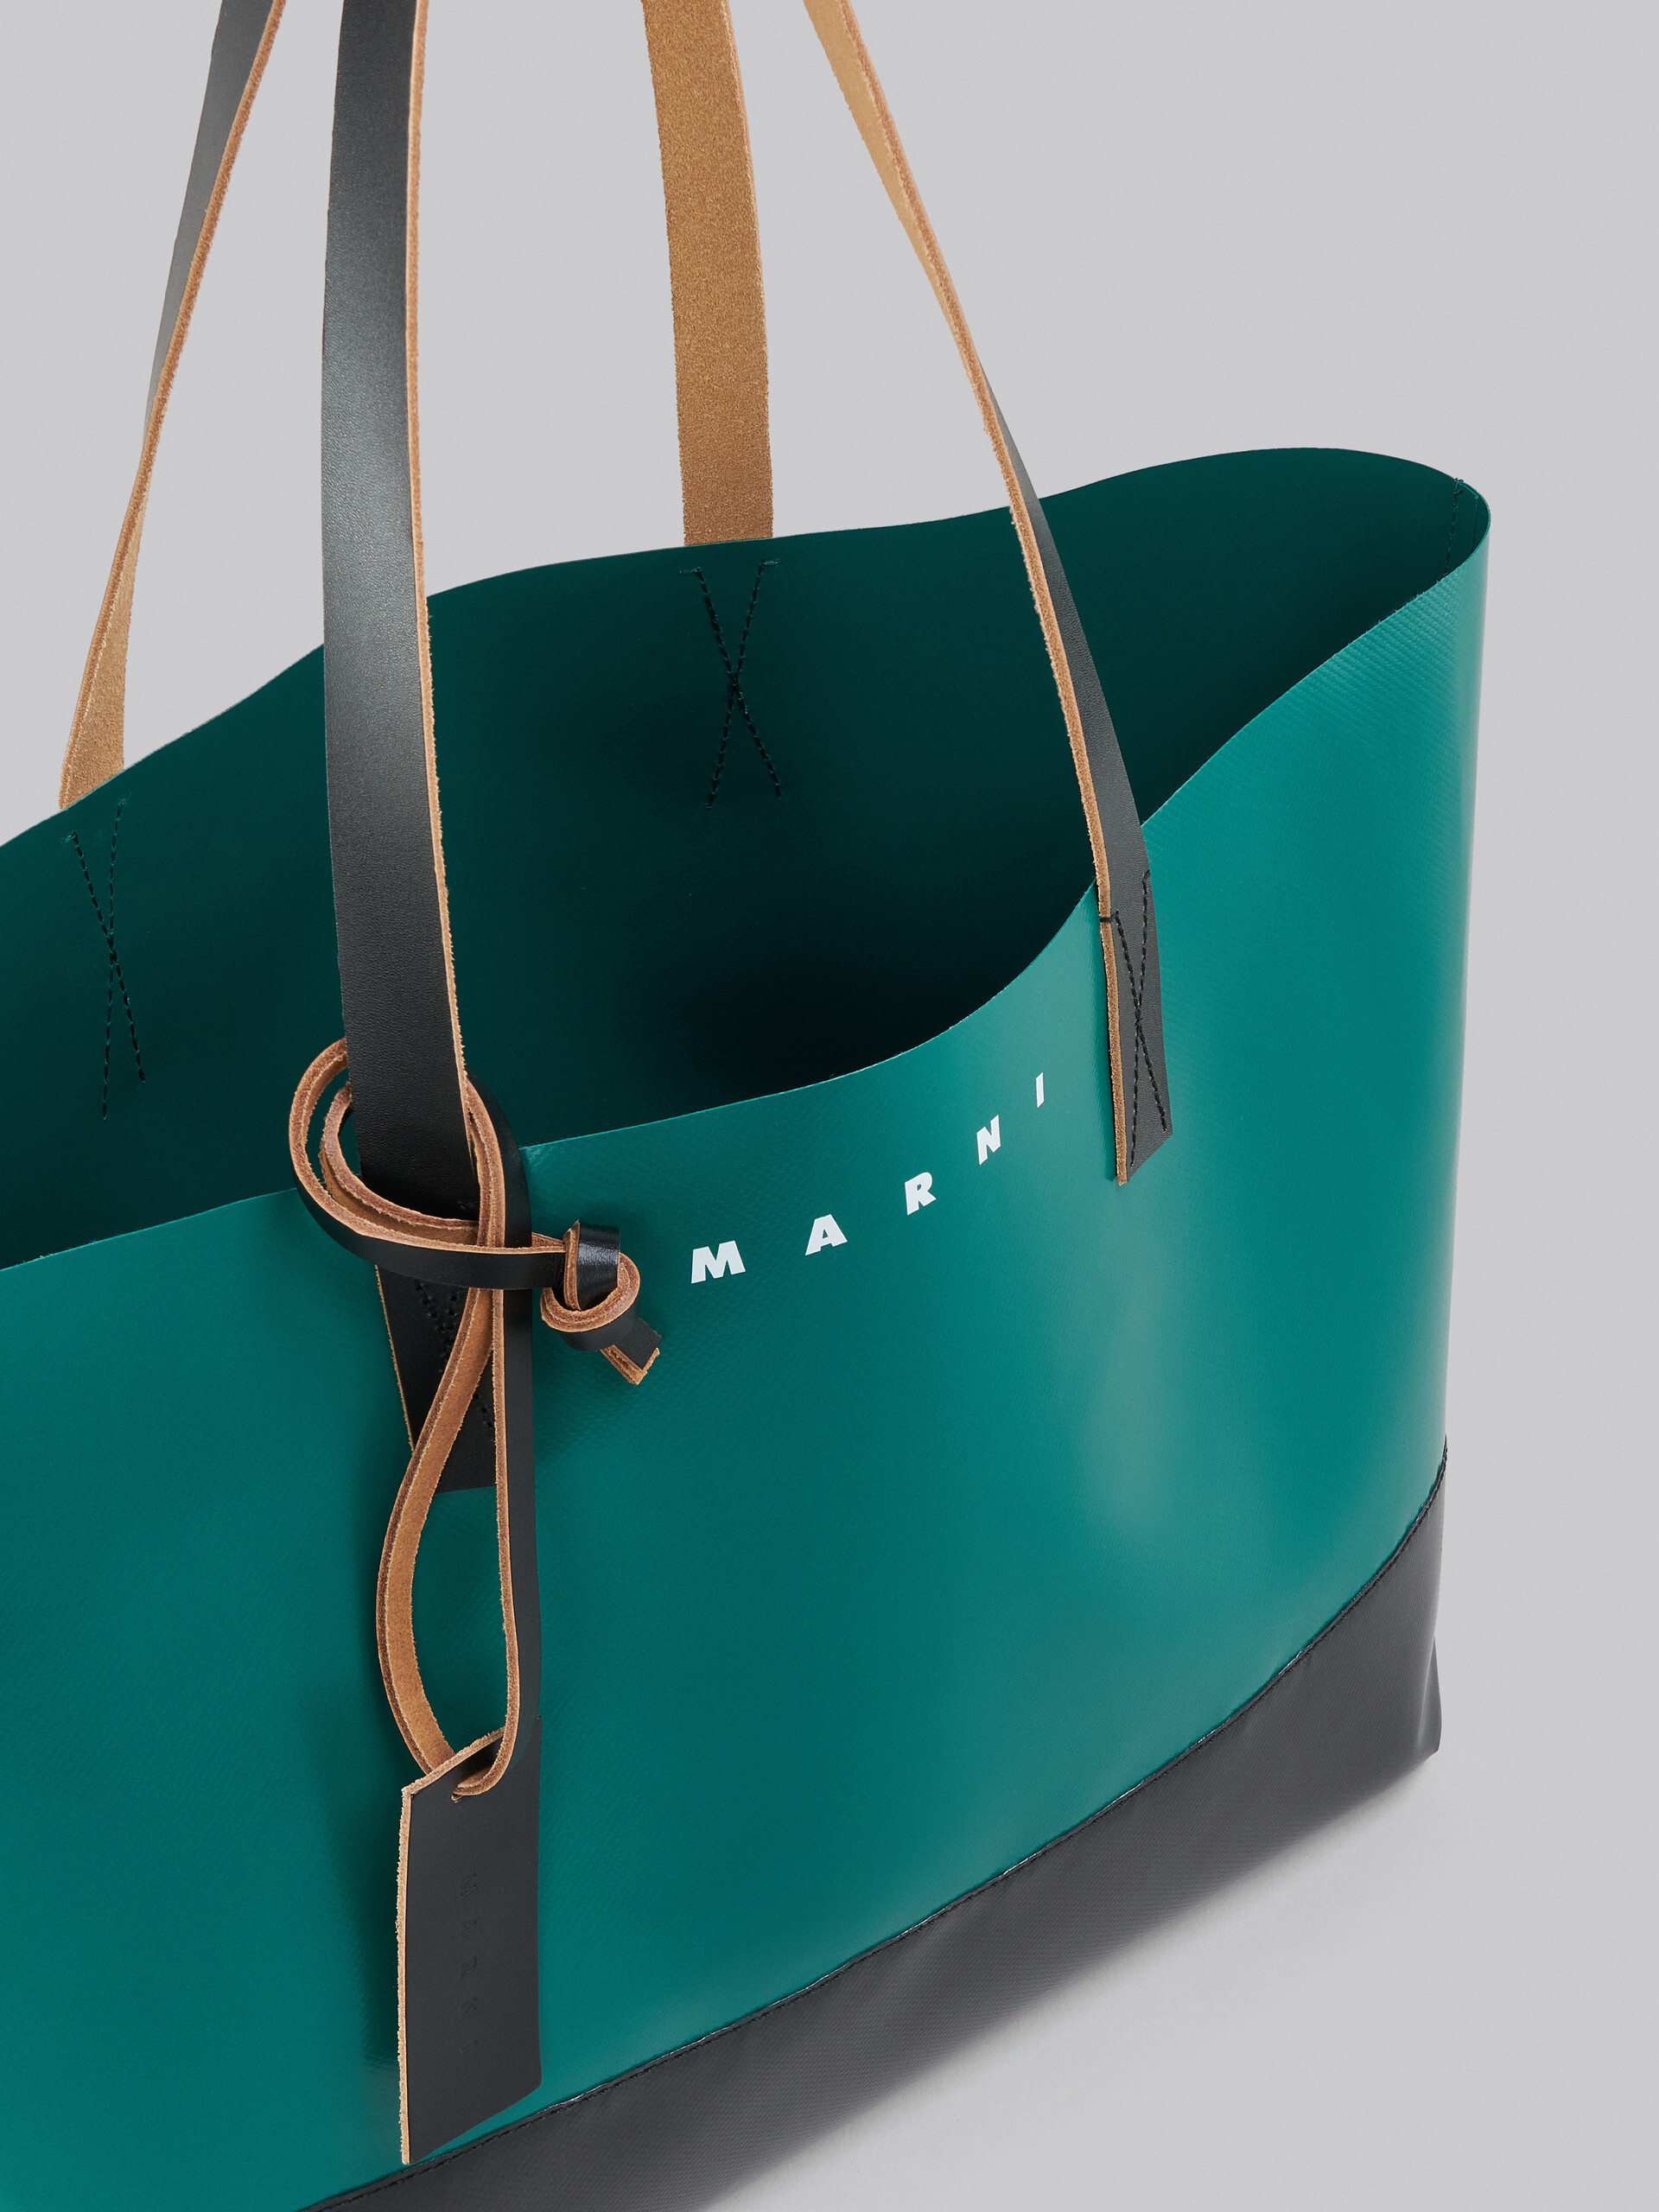 Tribeca shopping bag in green and black